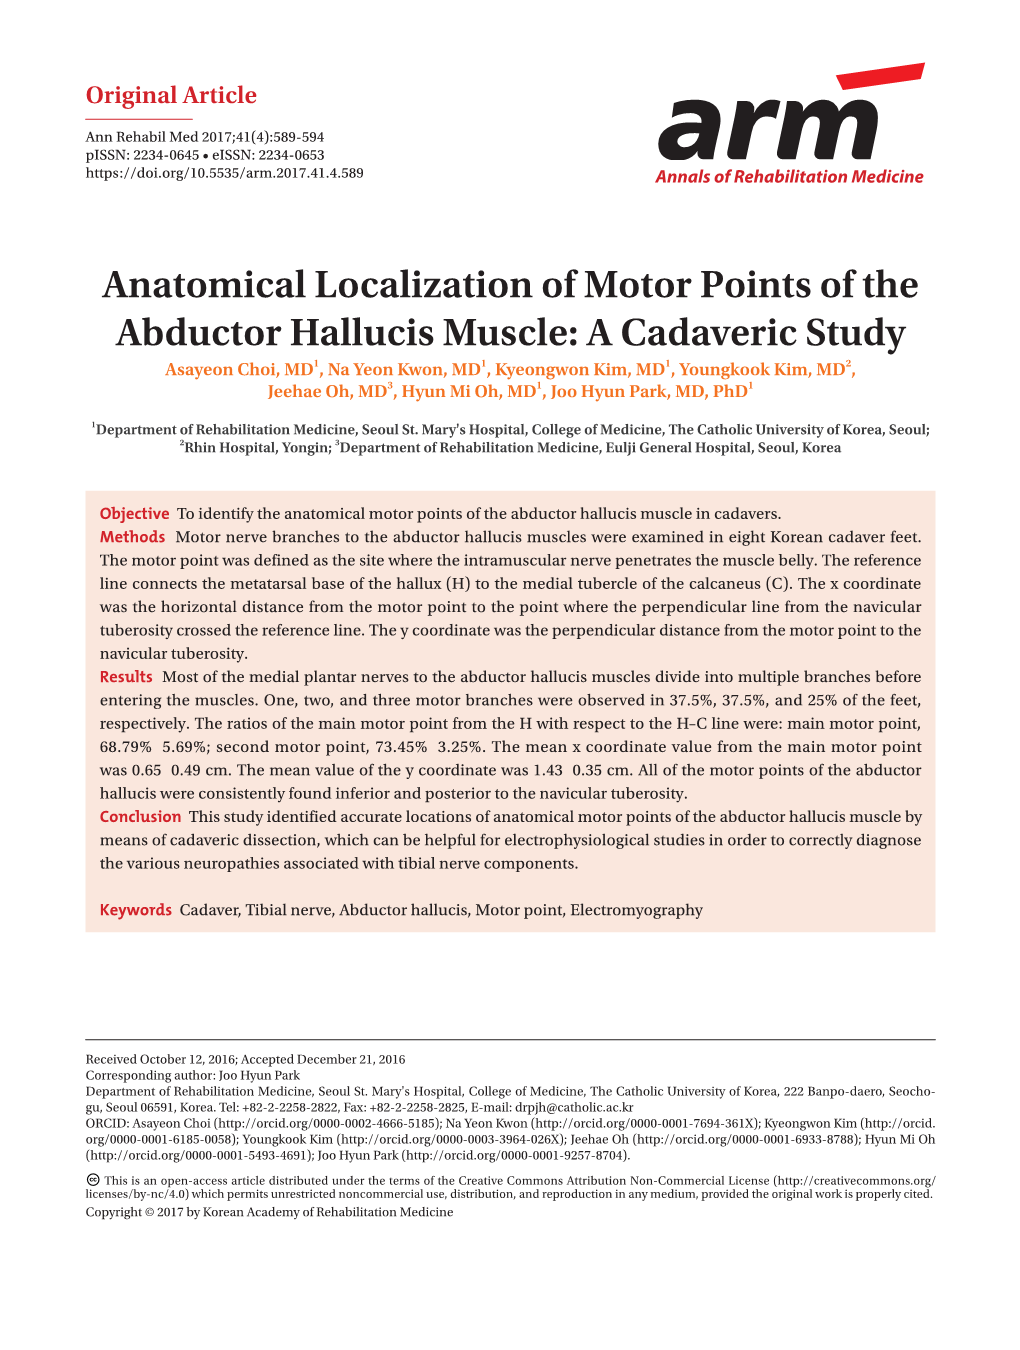 Anatomical Localization of Motor Points of The